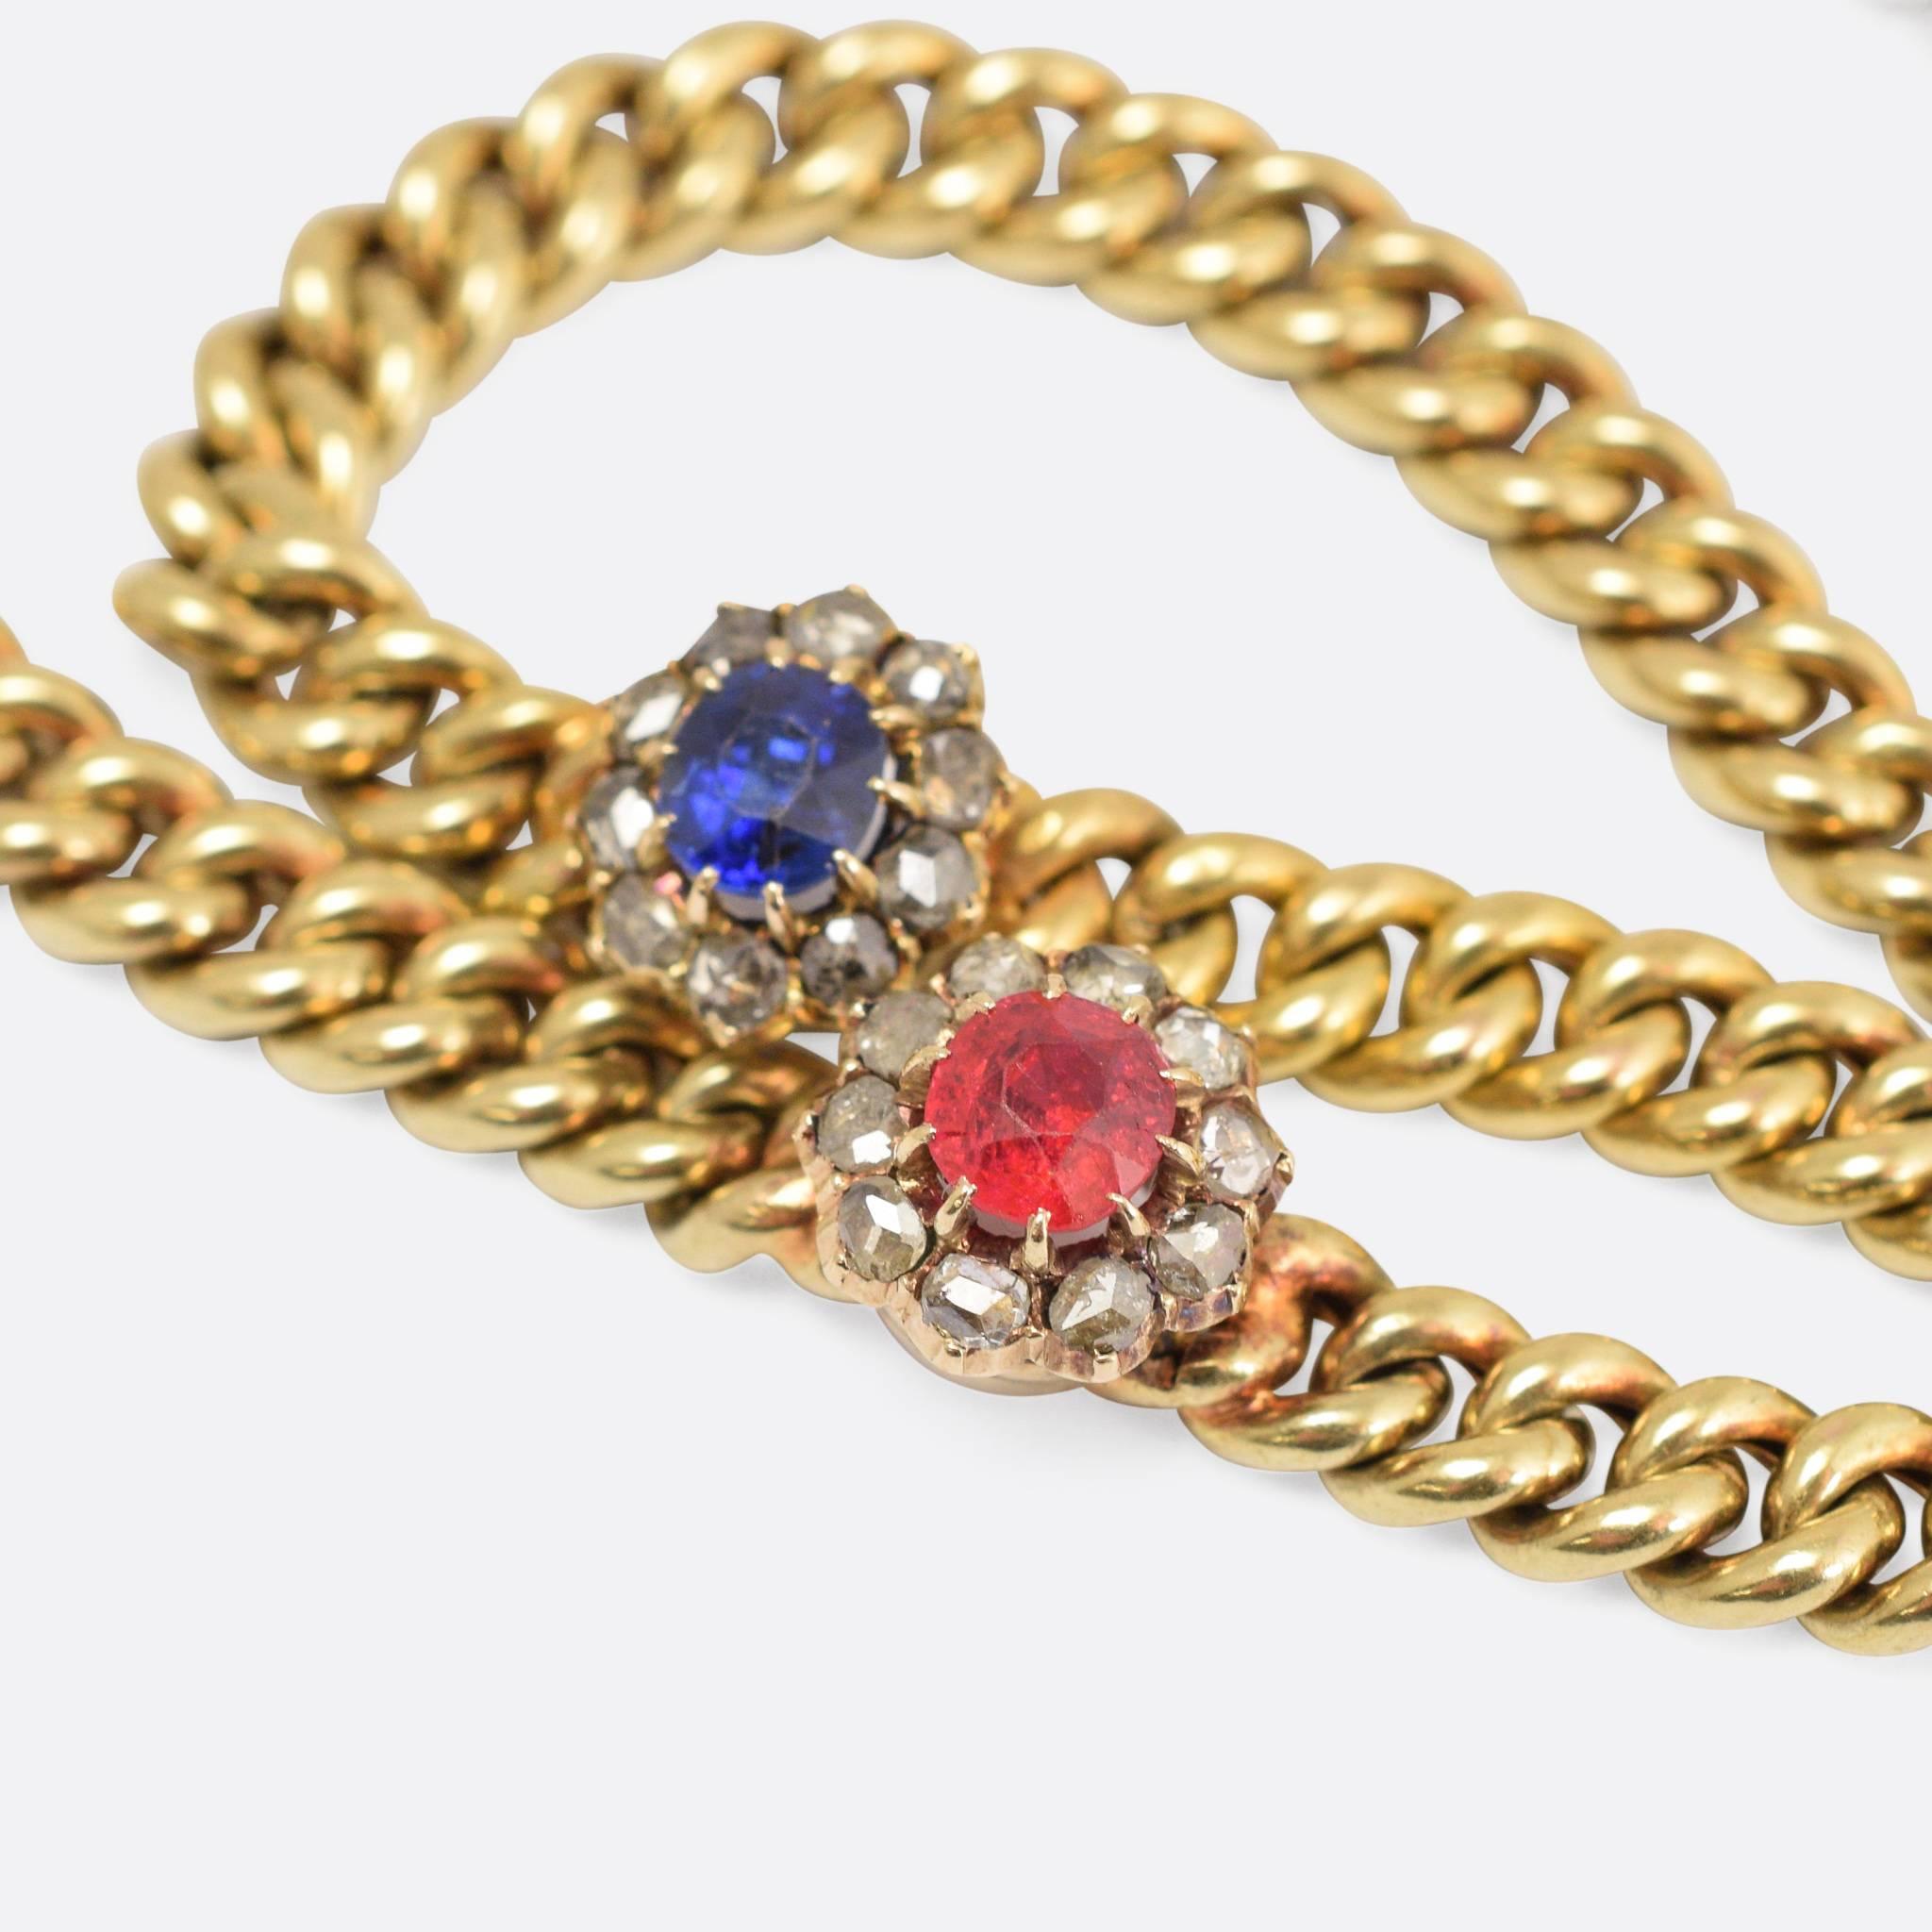 A fine quality 15k gold curbed link chain set with two clusters, a natural sapphire and ruby surrounded my rose cut diamonds. With original box snap fastener, the gold has a lovely buttery yellow hue and sits relatively highly on the wearers neck. 